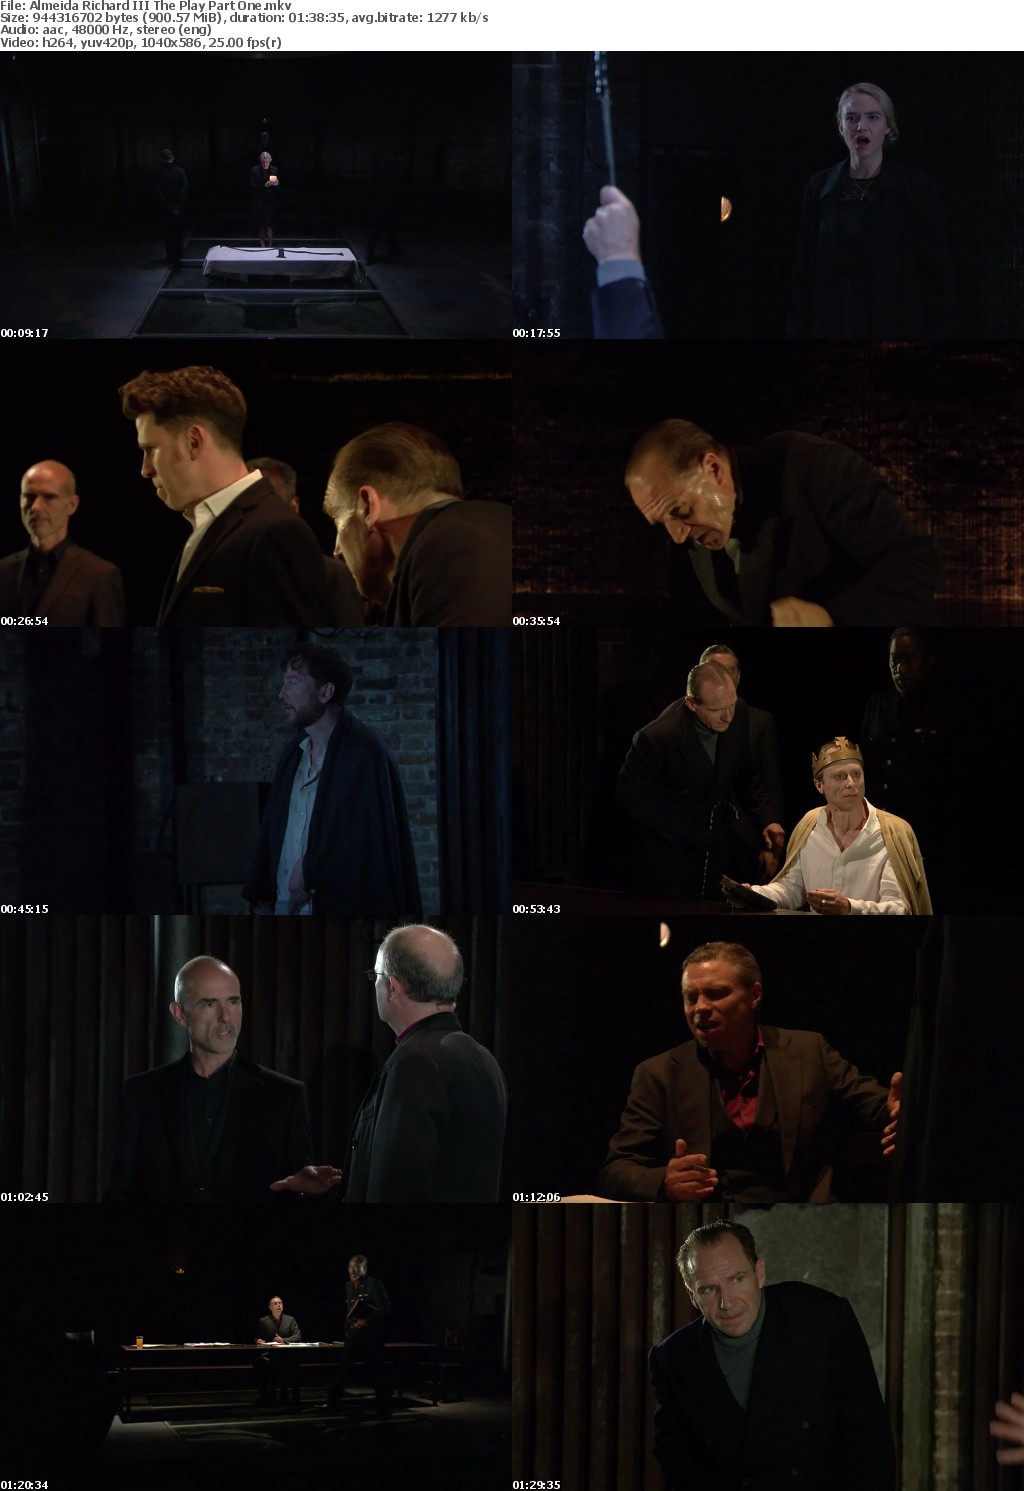 Shakespeares Richard III with Ralph Fiennes Live at Almieda Theatre 2016 Recode